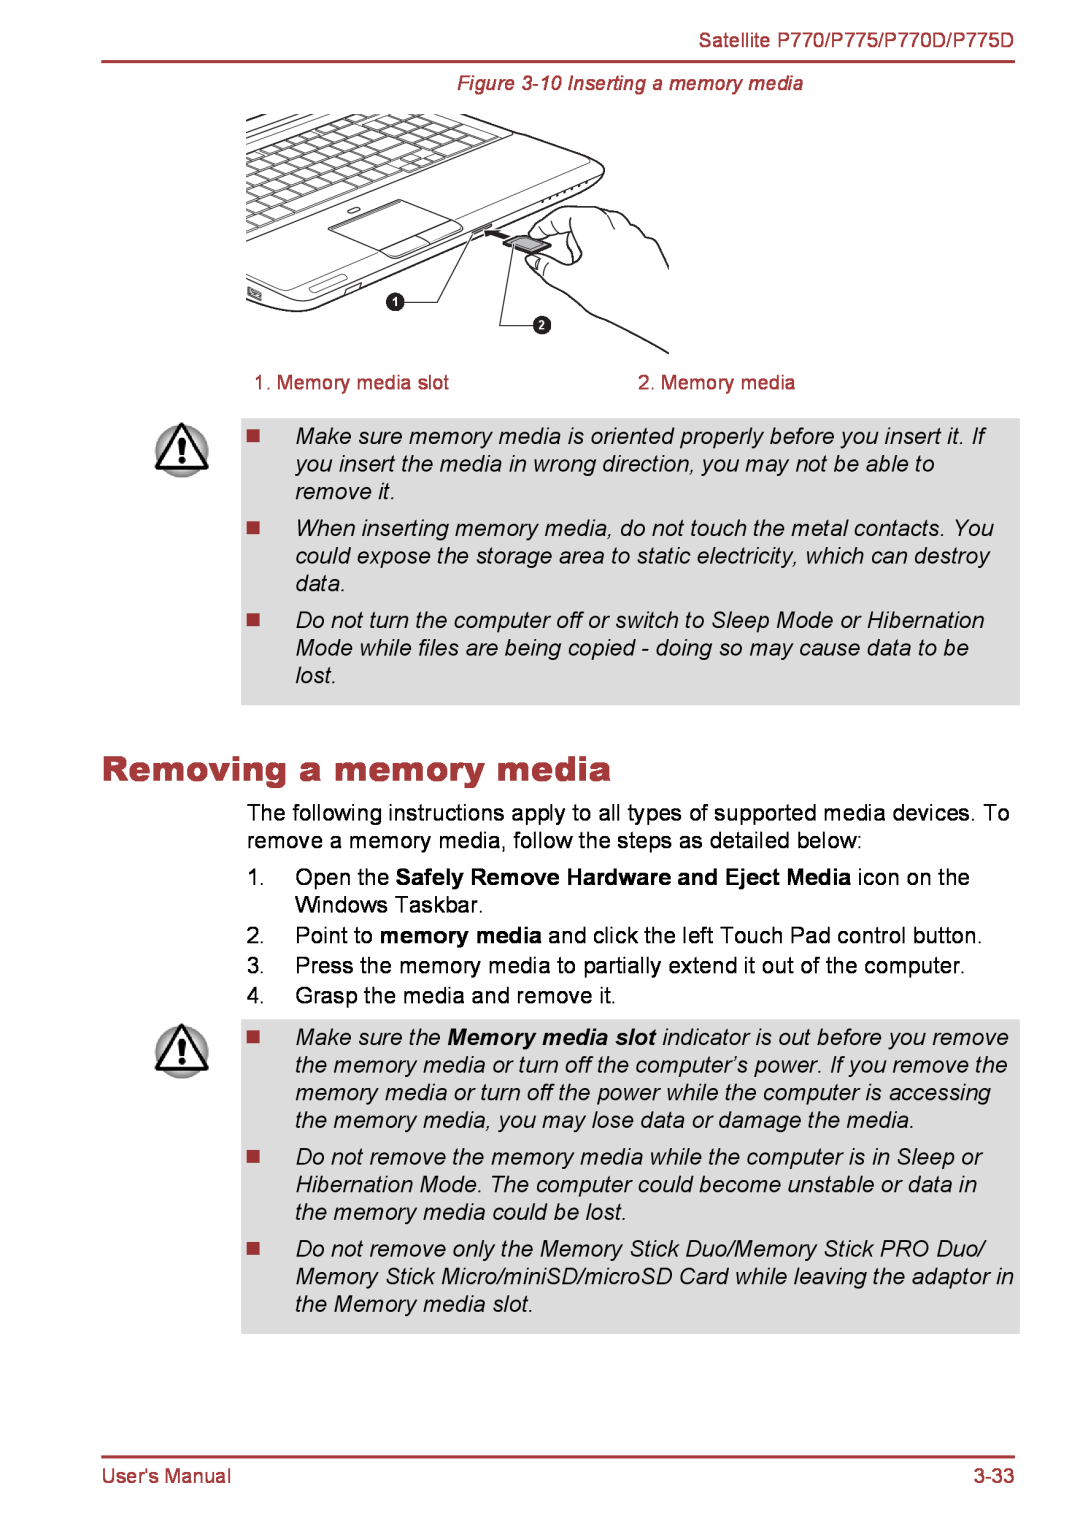 Toshiba P770 user manual Removing a memory media, Point to memory media and click the left Touch Pad control button 